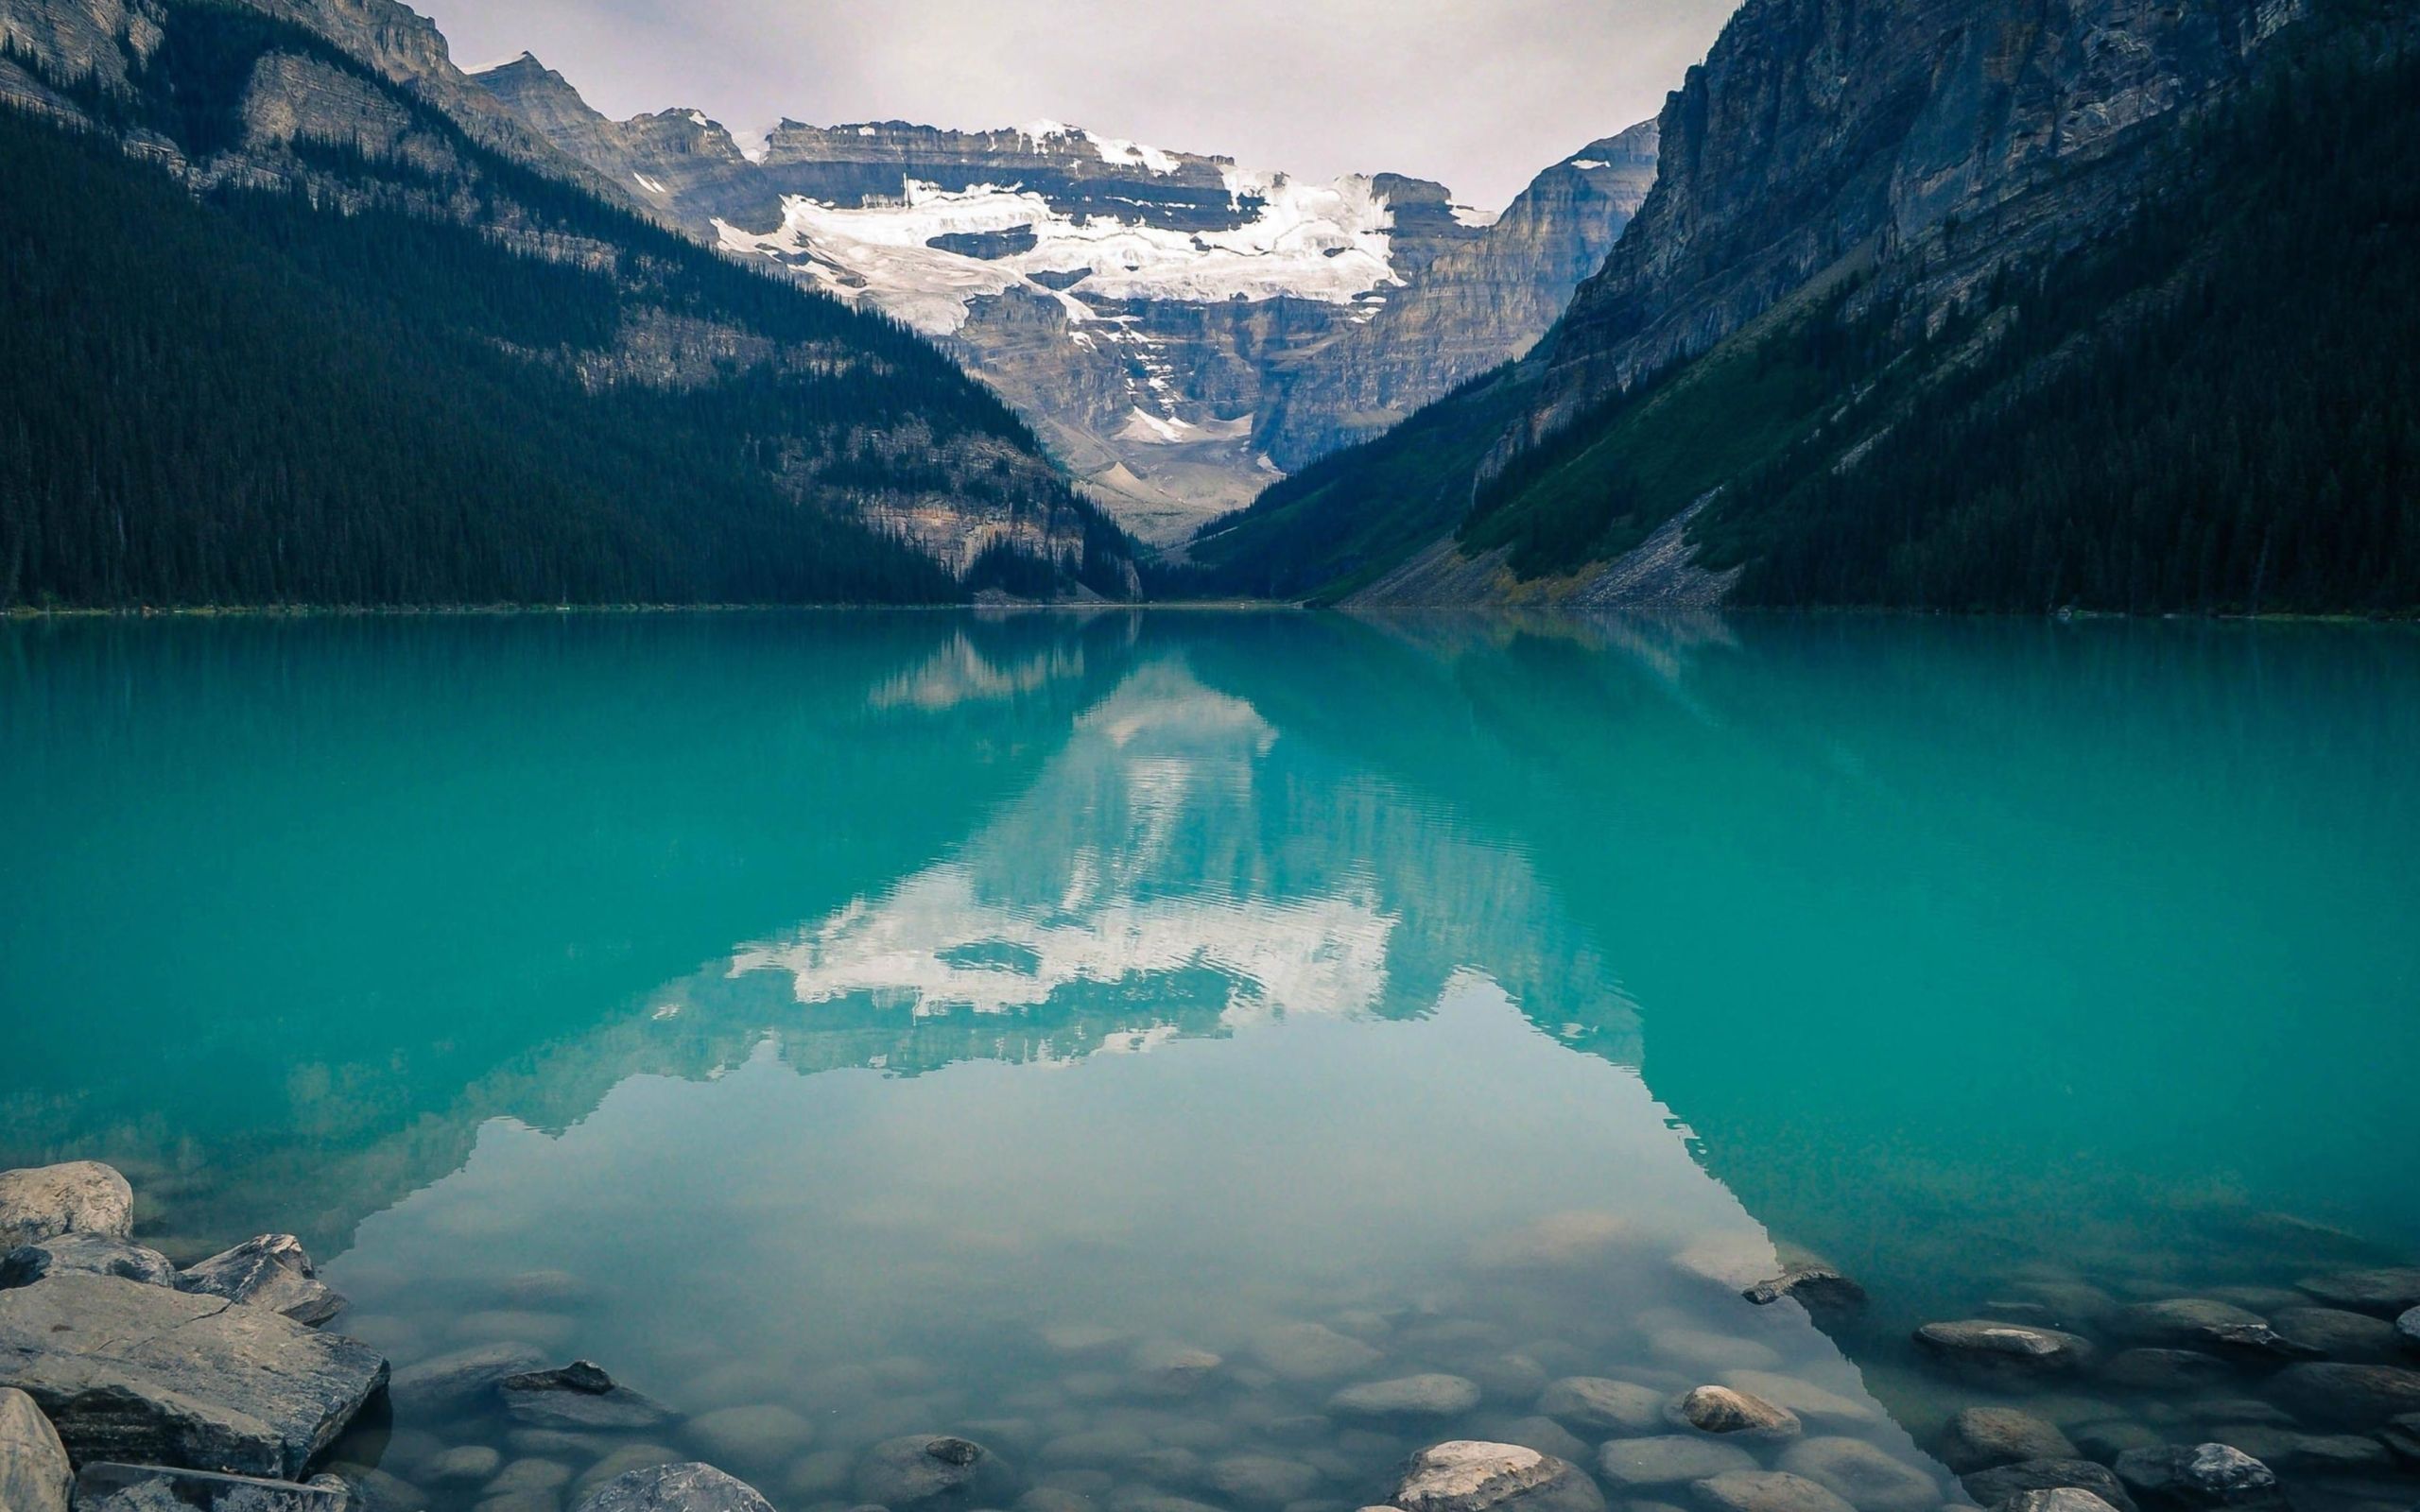 Free download the Lake Louise Canada wallpaper , beaty your mac book. #clean #Water #Snow #Mountain #Lake #Stone #Canada #Louise. Hình nền, Macbook, Macbook air